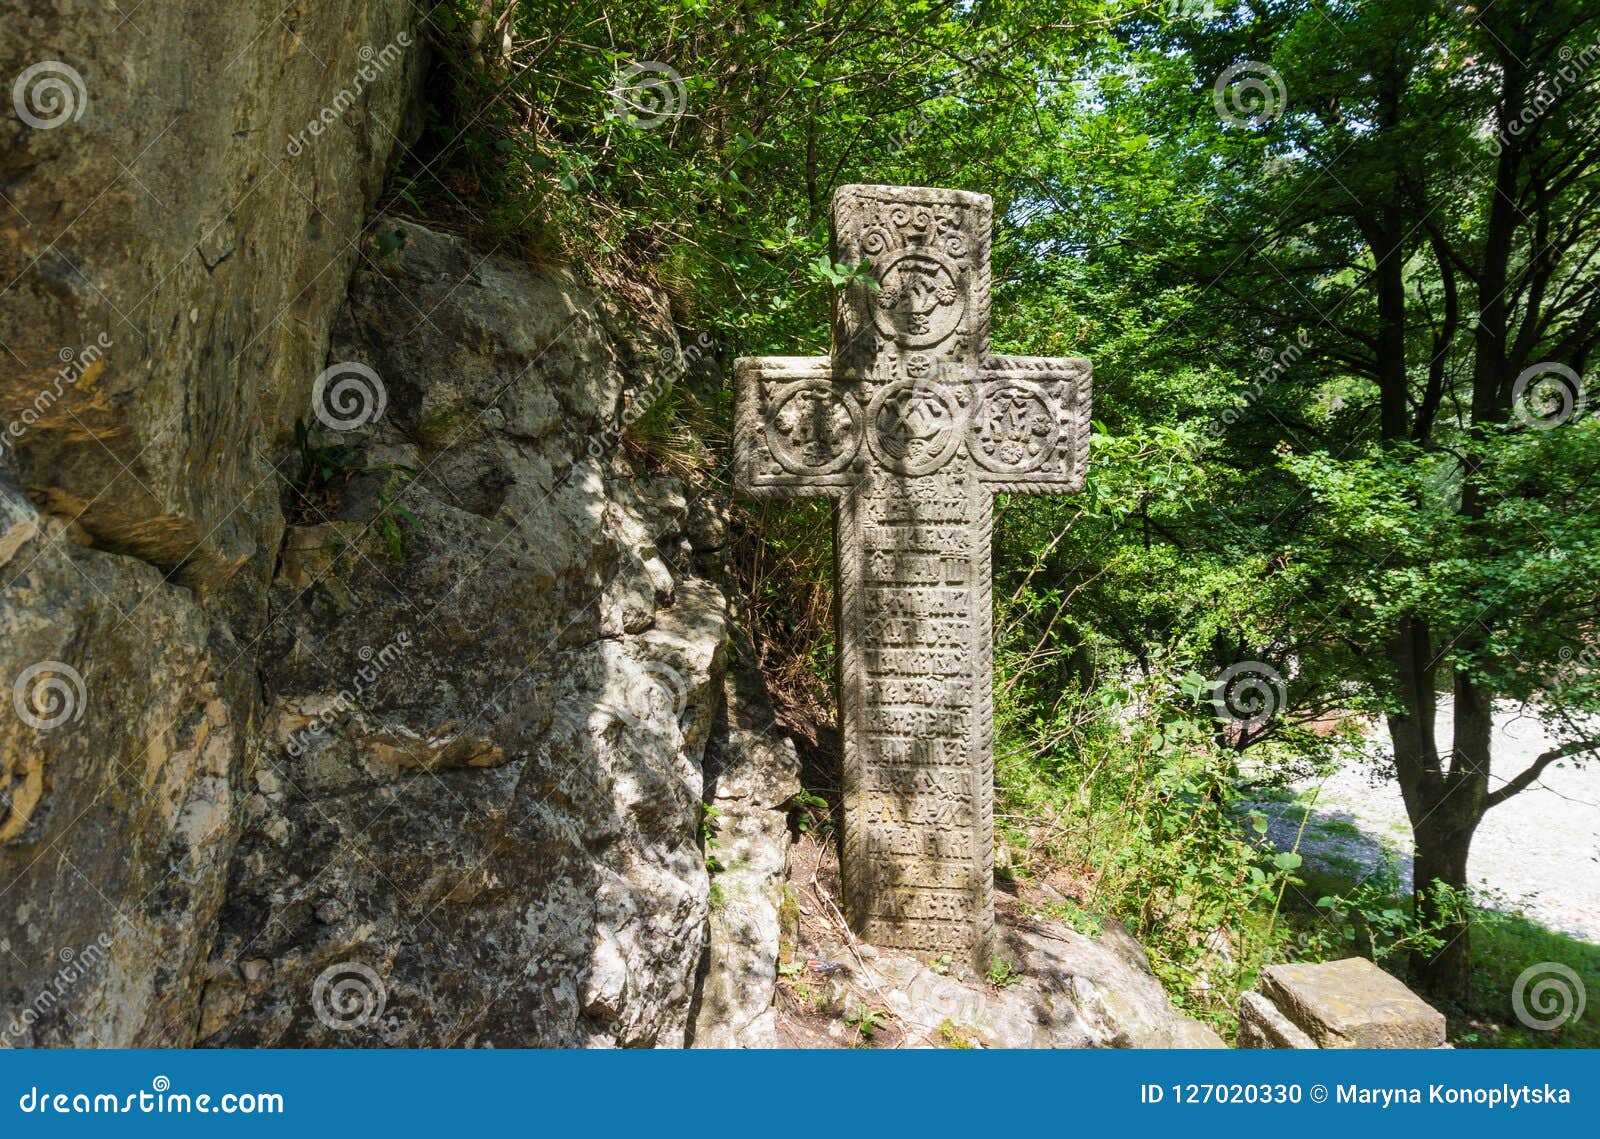 Mysterious Ancient Stone Cross With Runic Symbols Landmarks Of Bran Castle Romania Editorial Image Image Of Count Forest